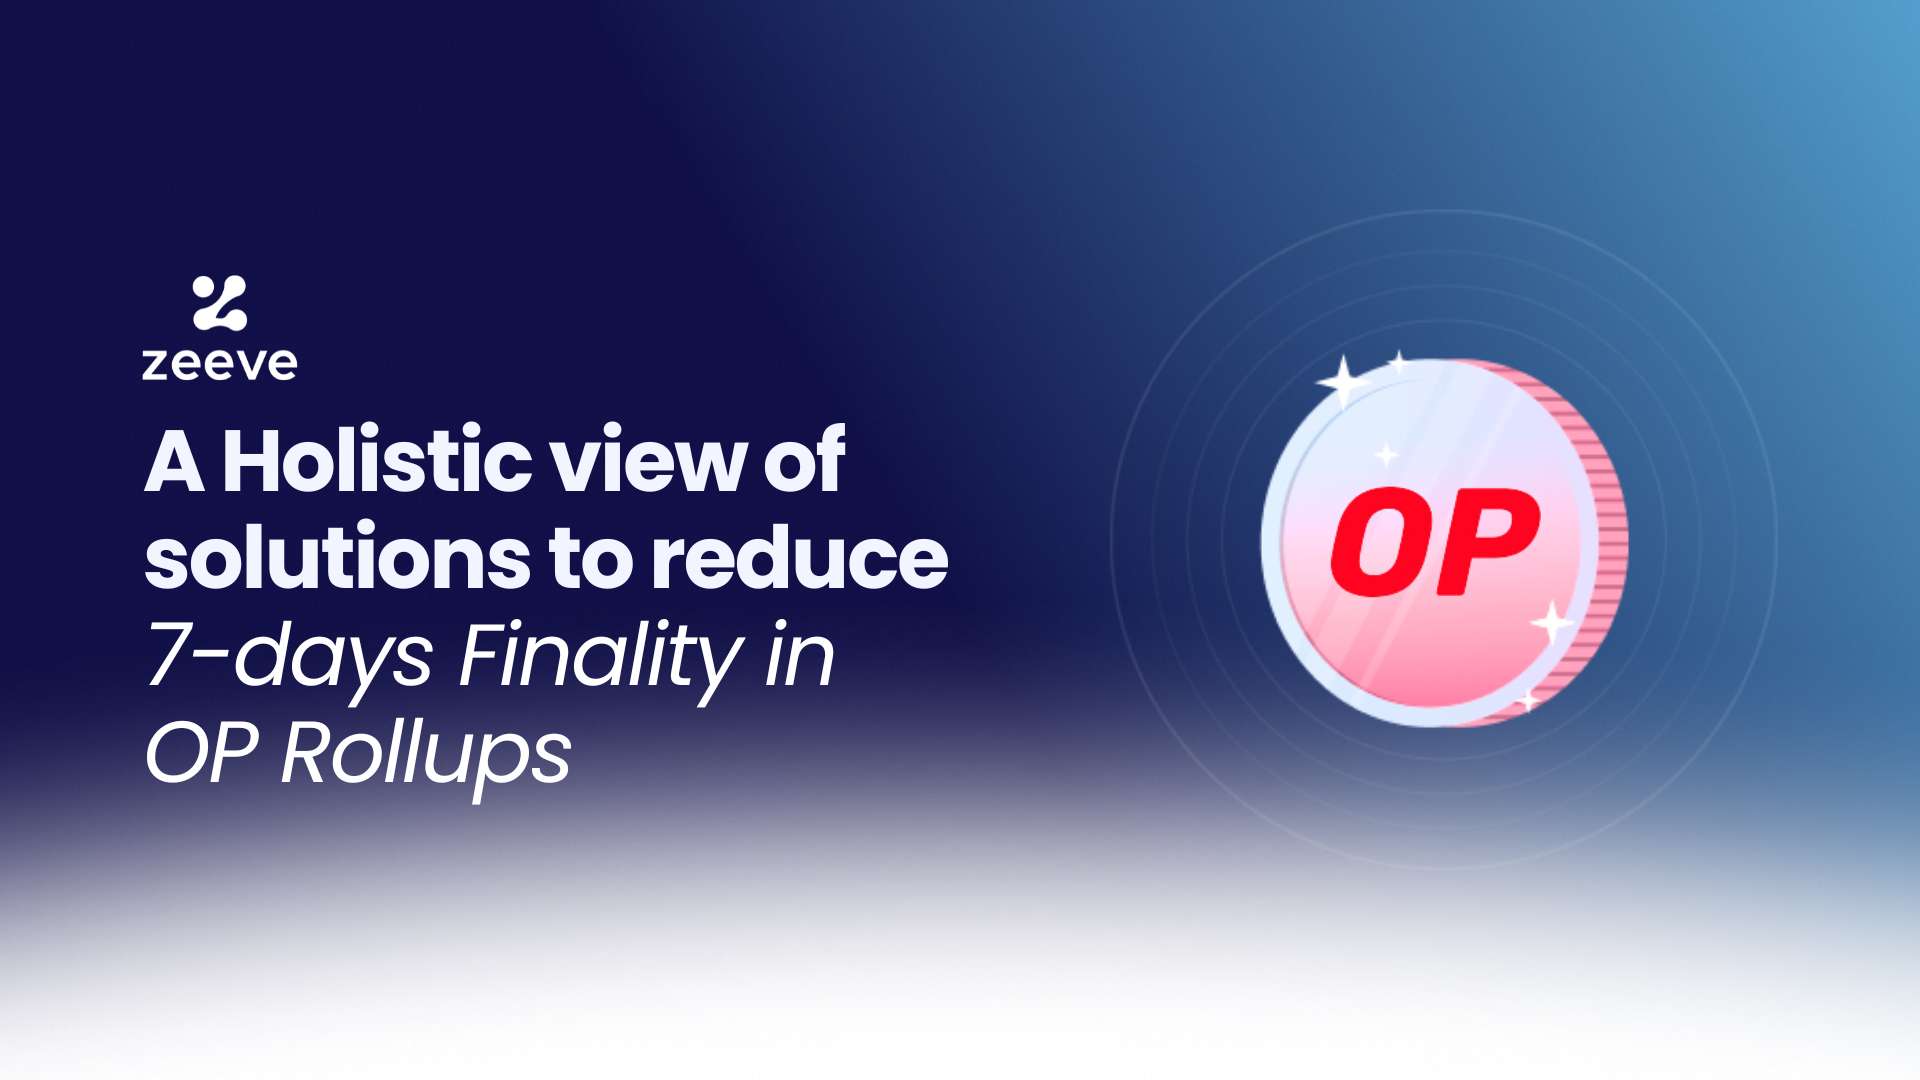 Finality in OP Rollups solutions